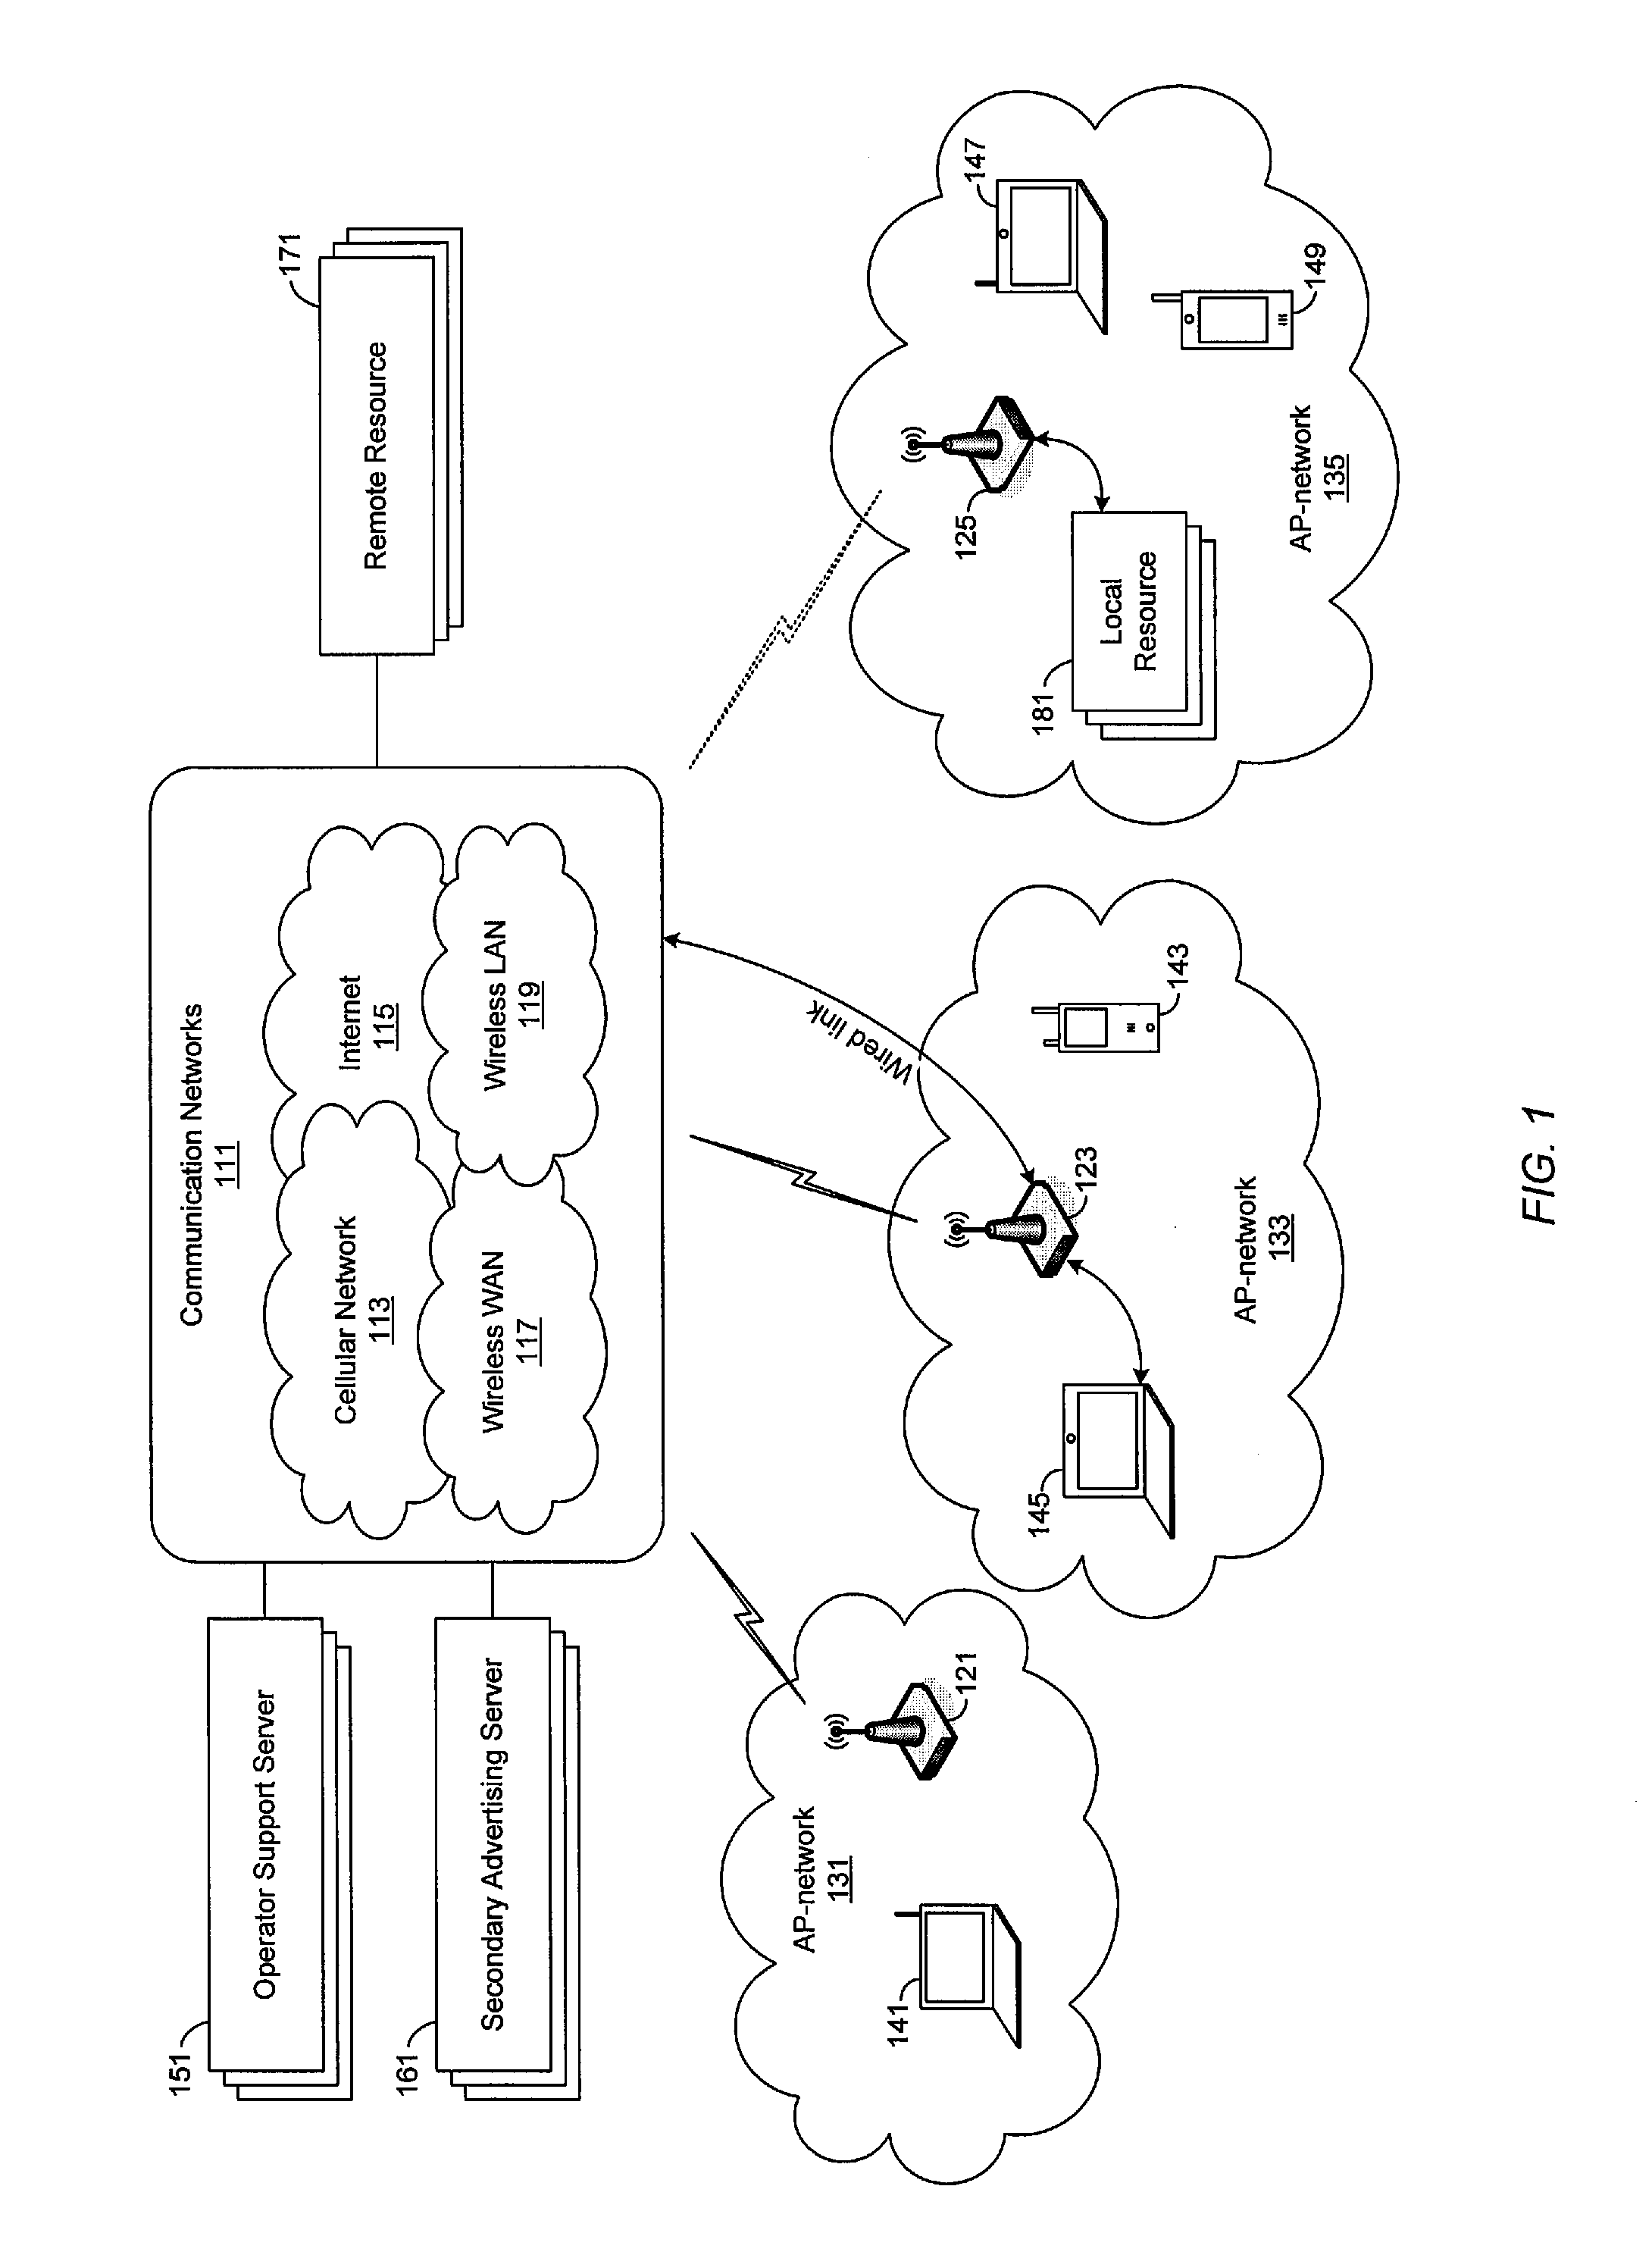 Providing private access point services in a communication system